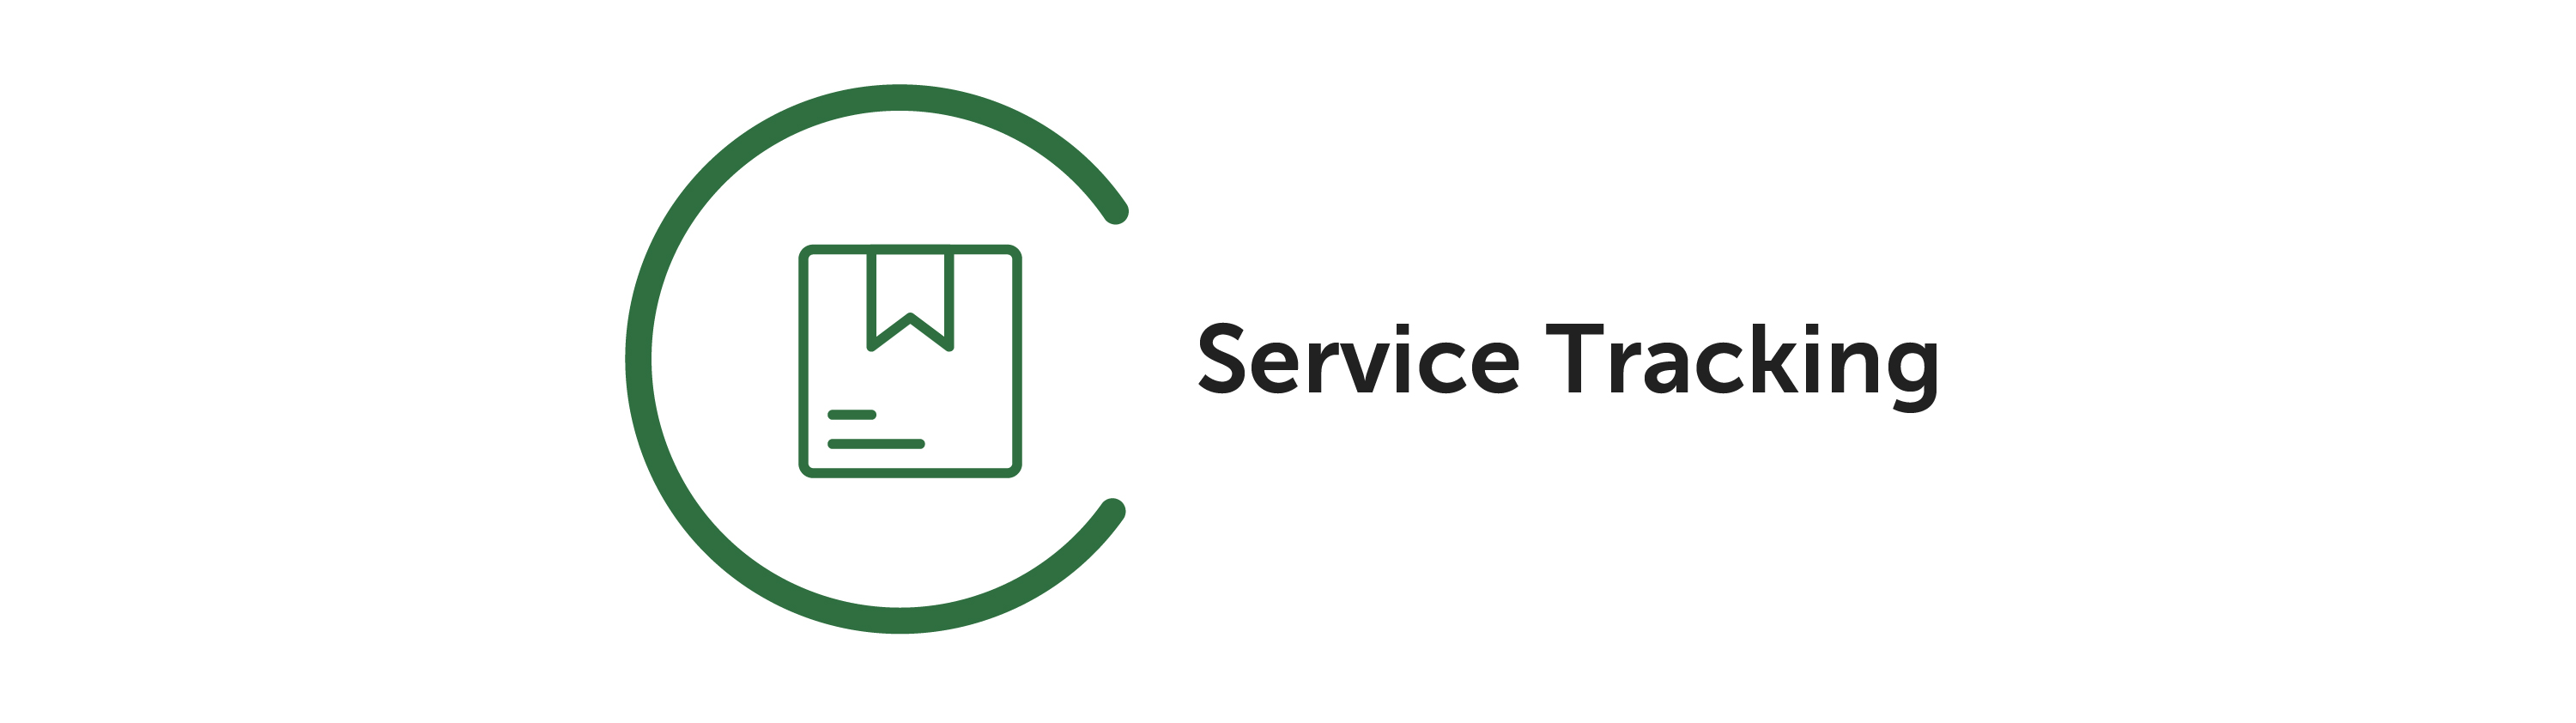 Tradeline Support Tracking